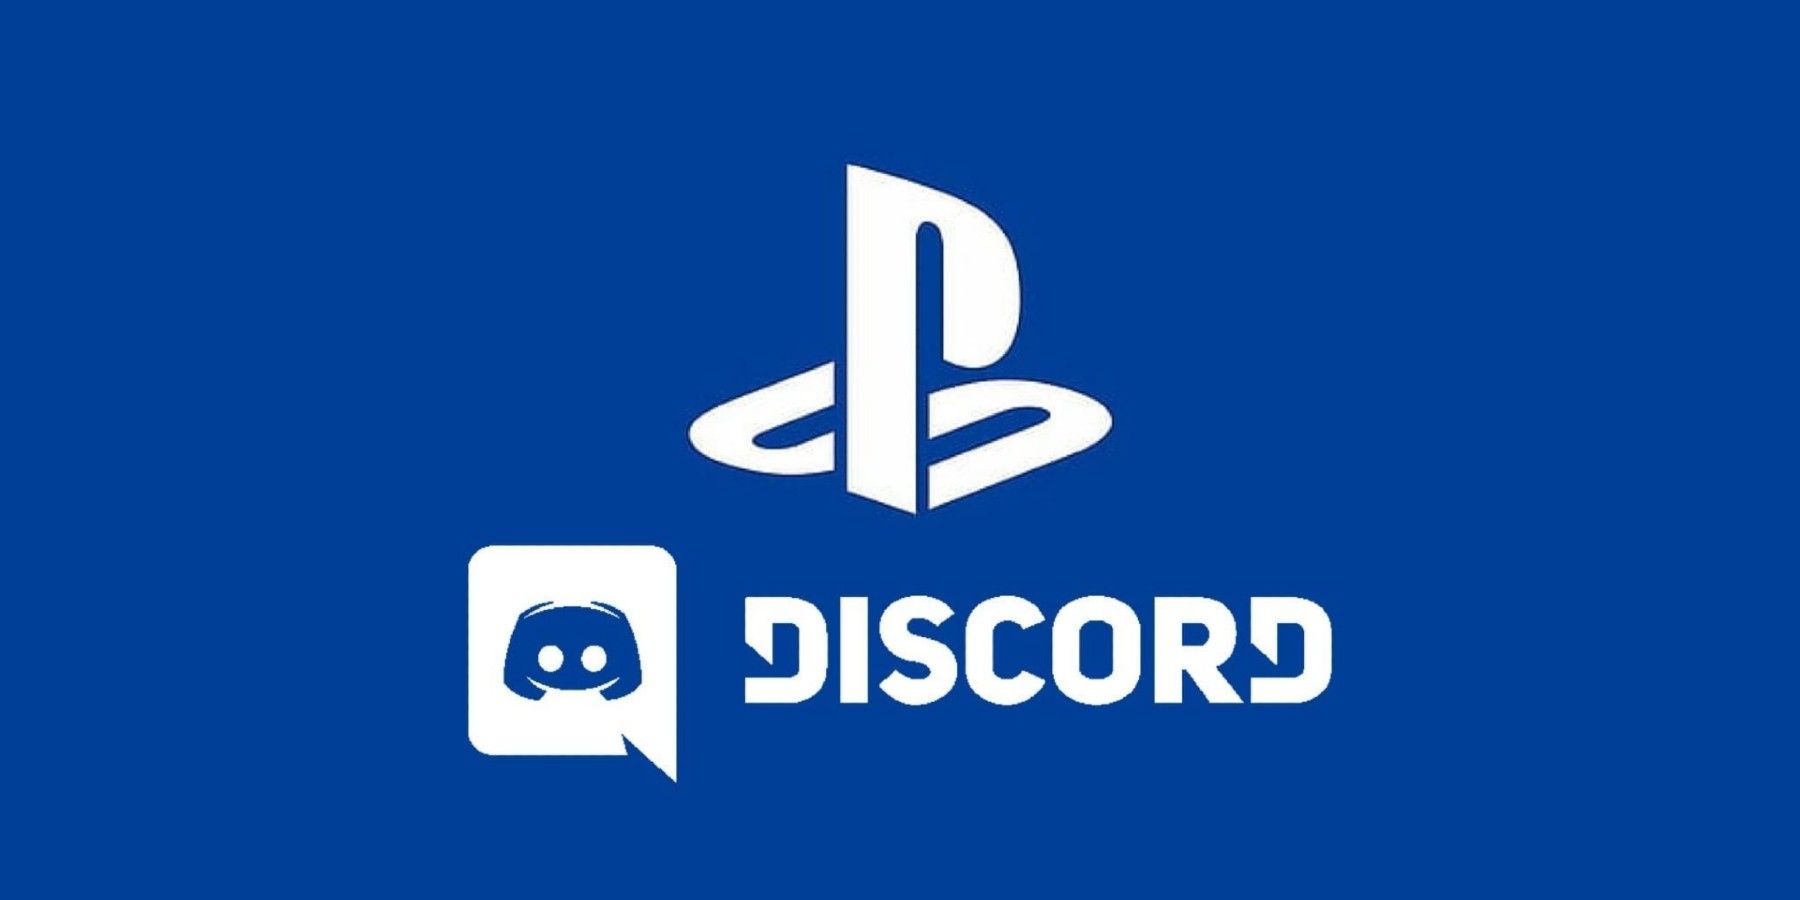 PlayStation Owners Will Finally Be Able to Link Their Discord and PSN  Accounts - IGN